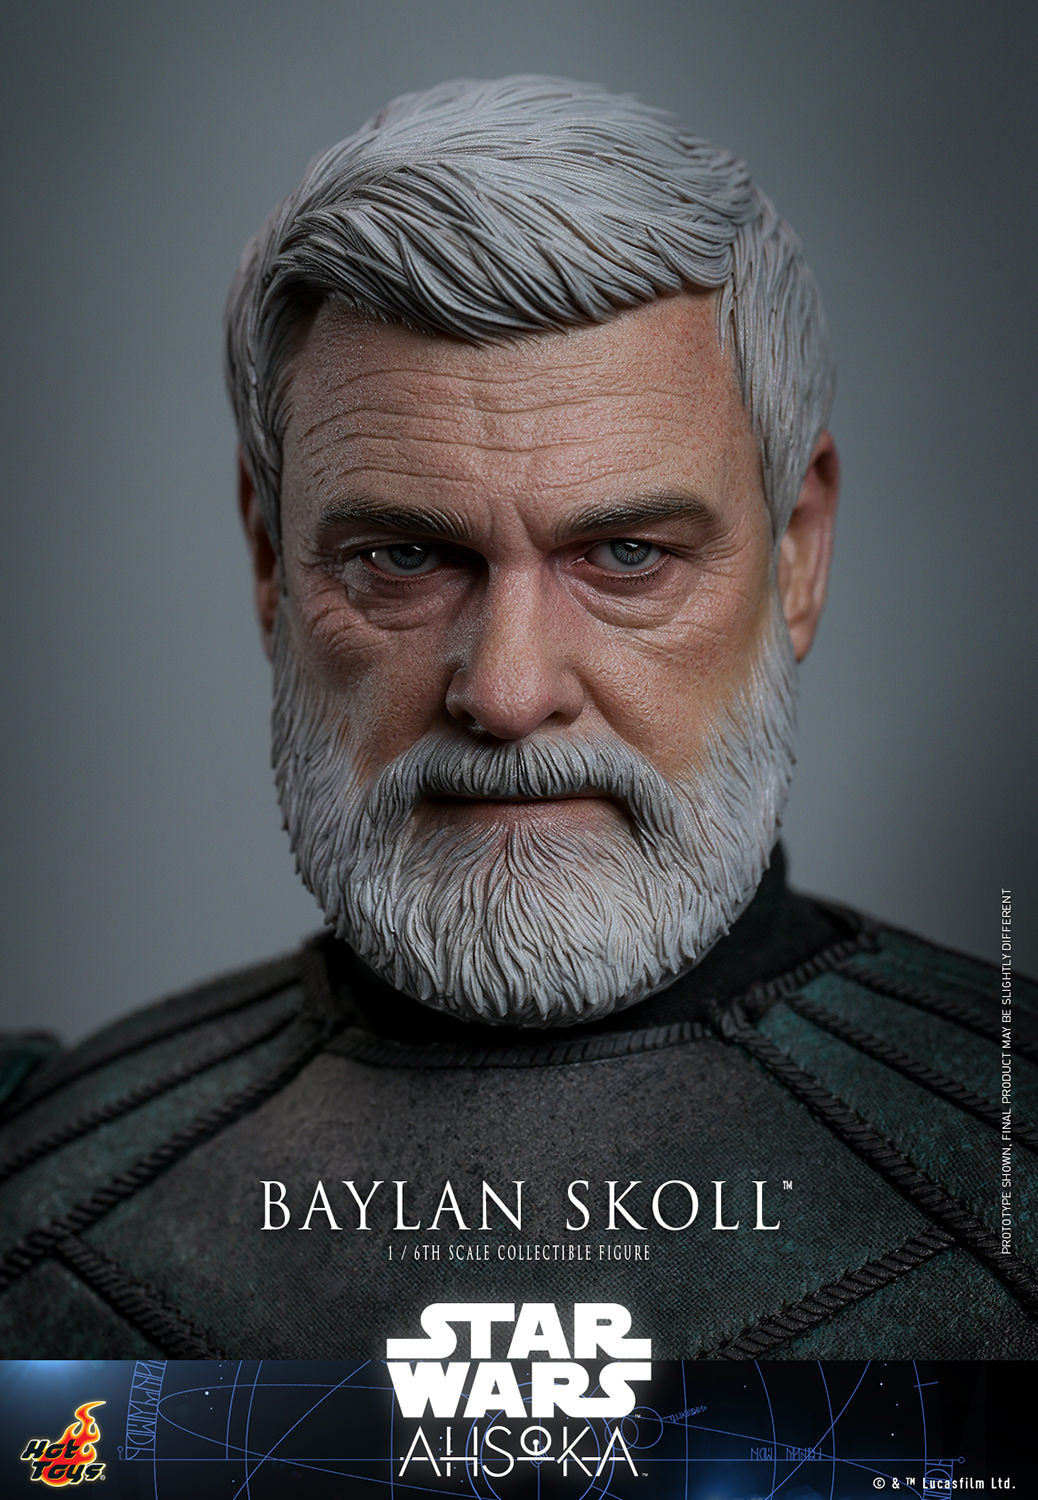 Baylan Skoll Sixth Scale Figure by Hot Toys